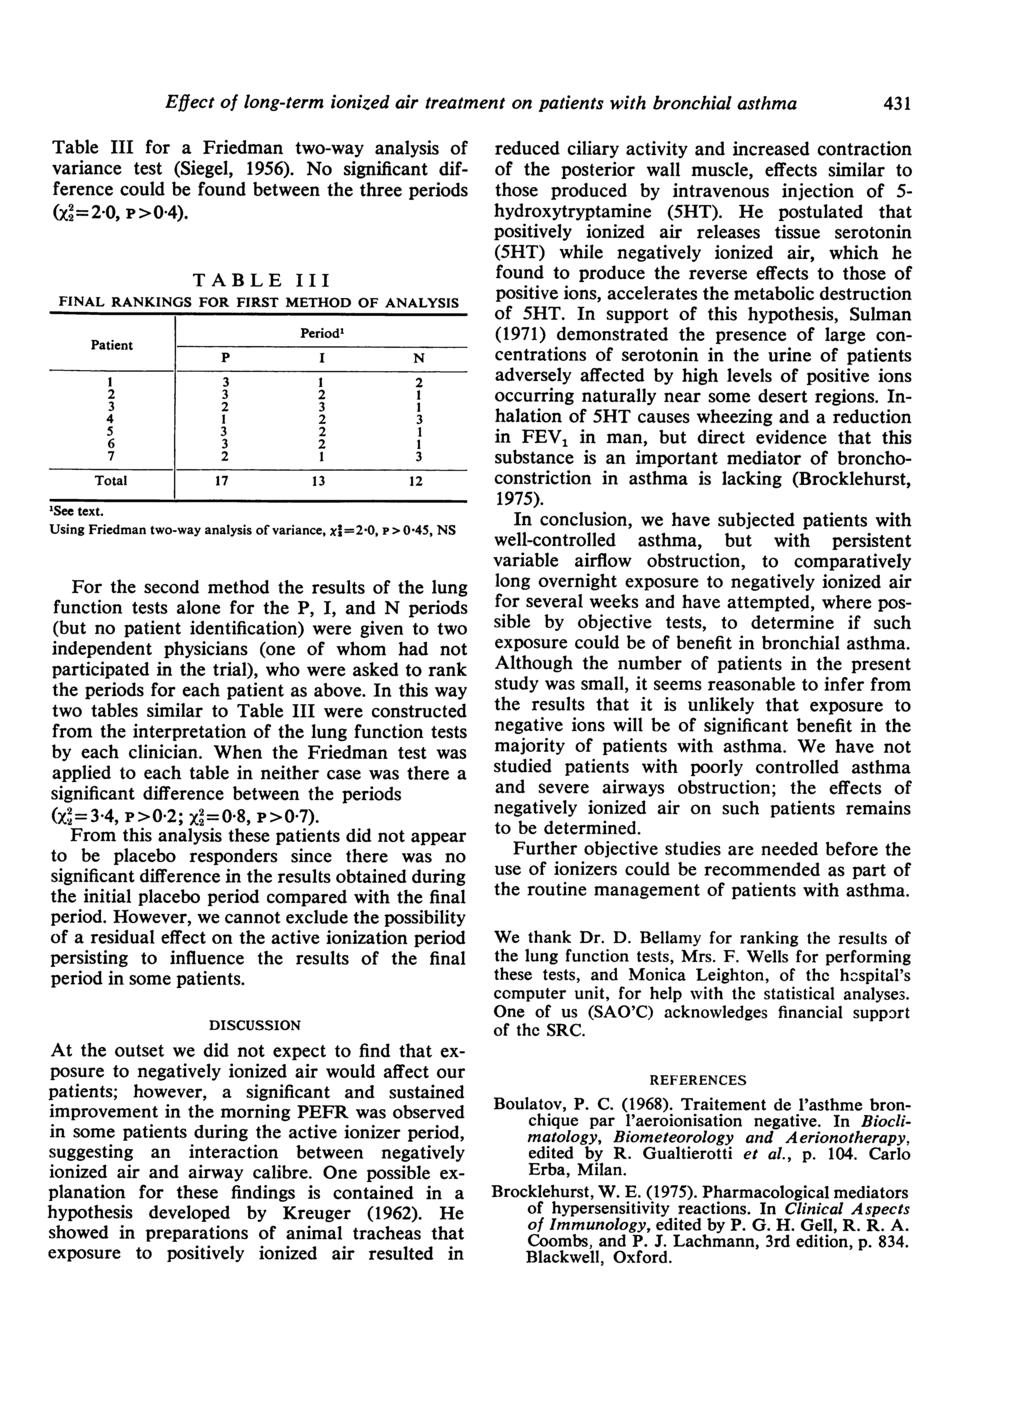 Effect of long-term ionized air treatment on patients with bronchial asthma 431 Table III for a Friedman two-way analysis of variance test (Siegel, 1956).